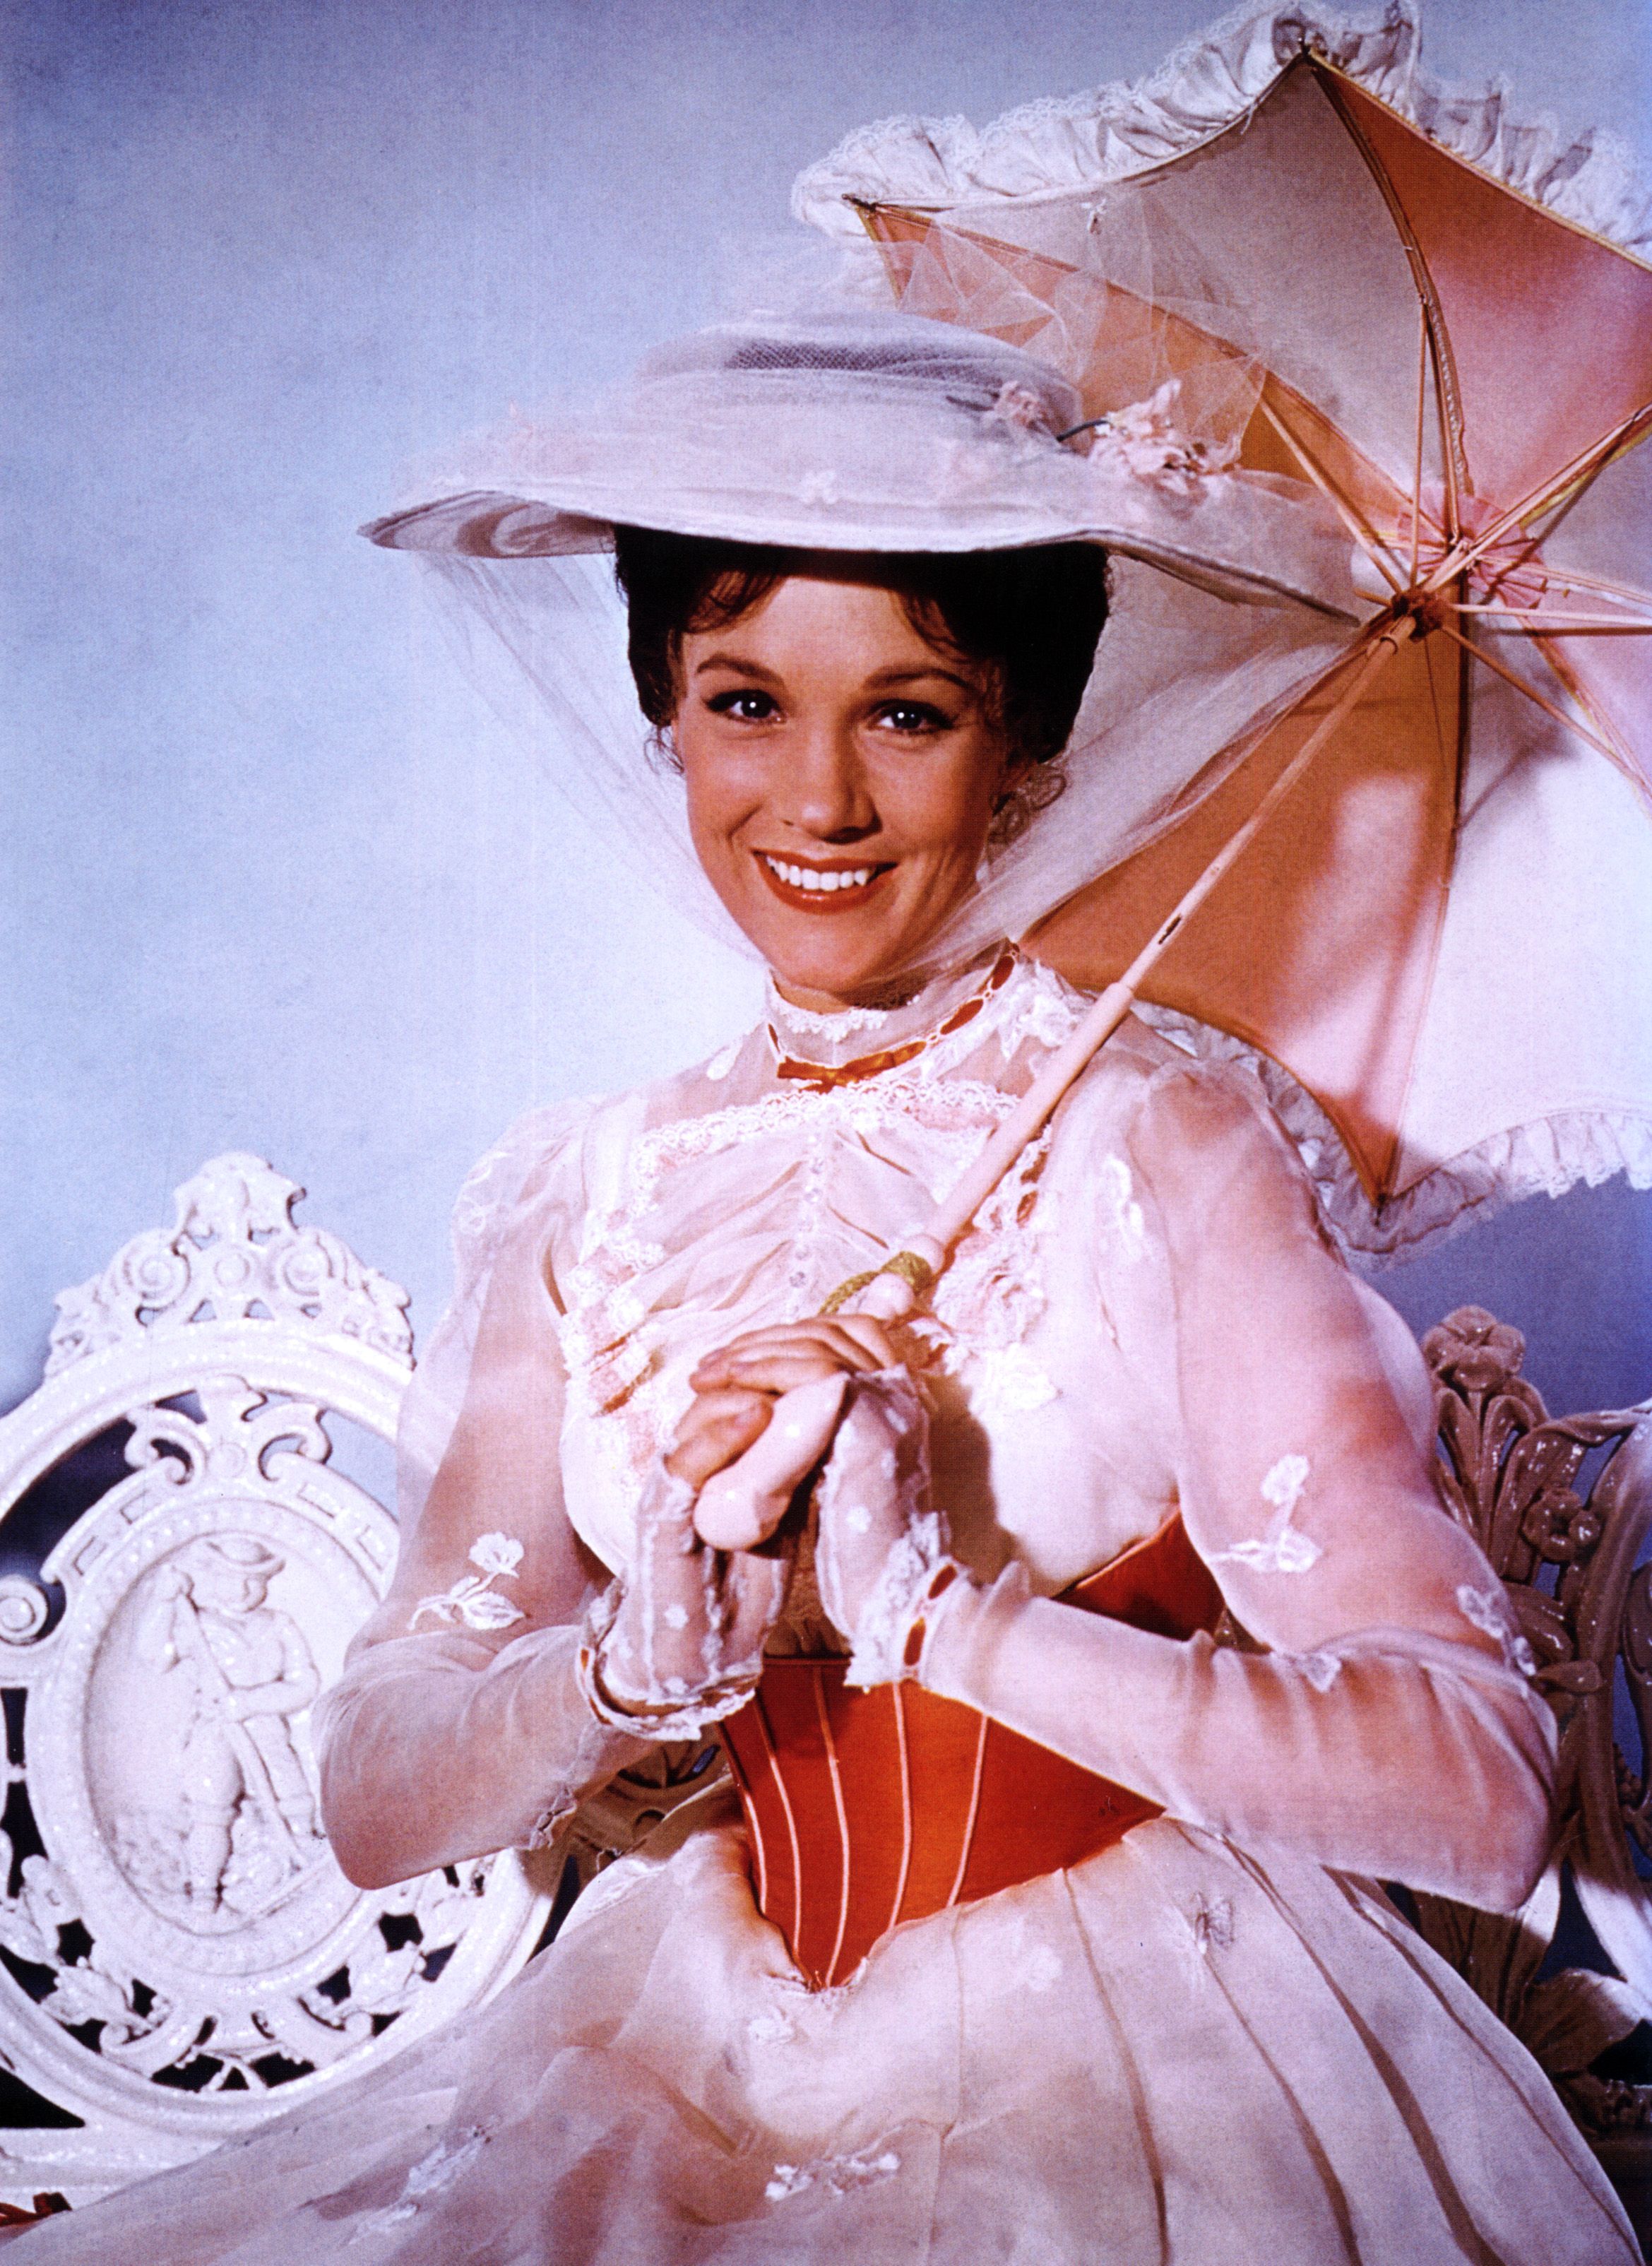 Old Porn Nude Julie Andrews - Watch Julie Andrews Talk About Filming Mary Poppins's Flying Scenes in Video